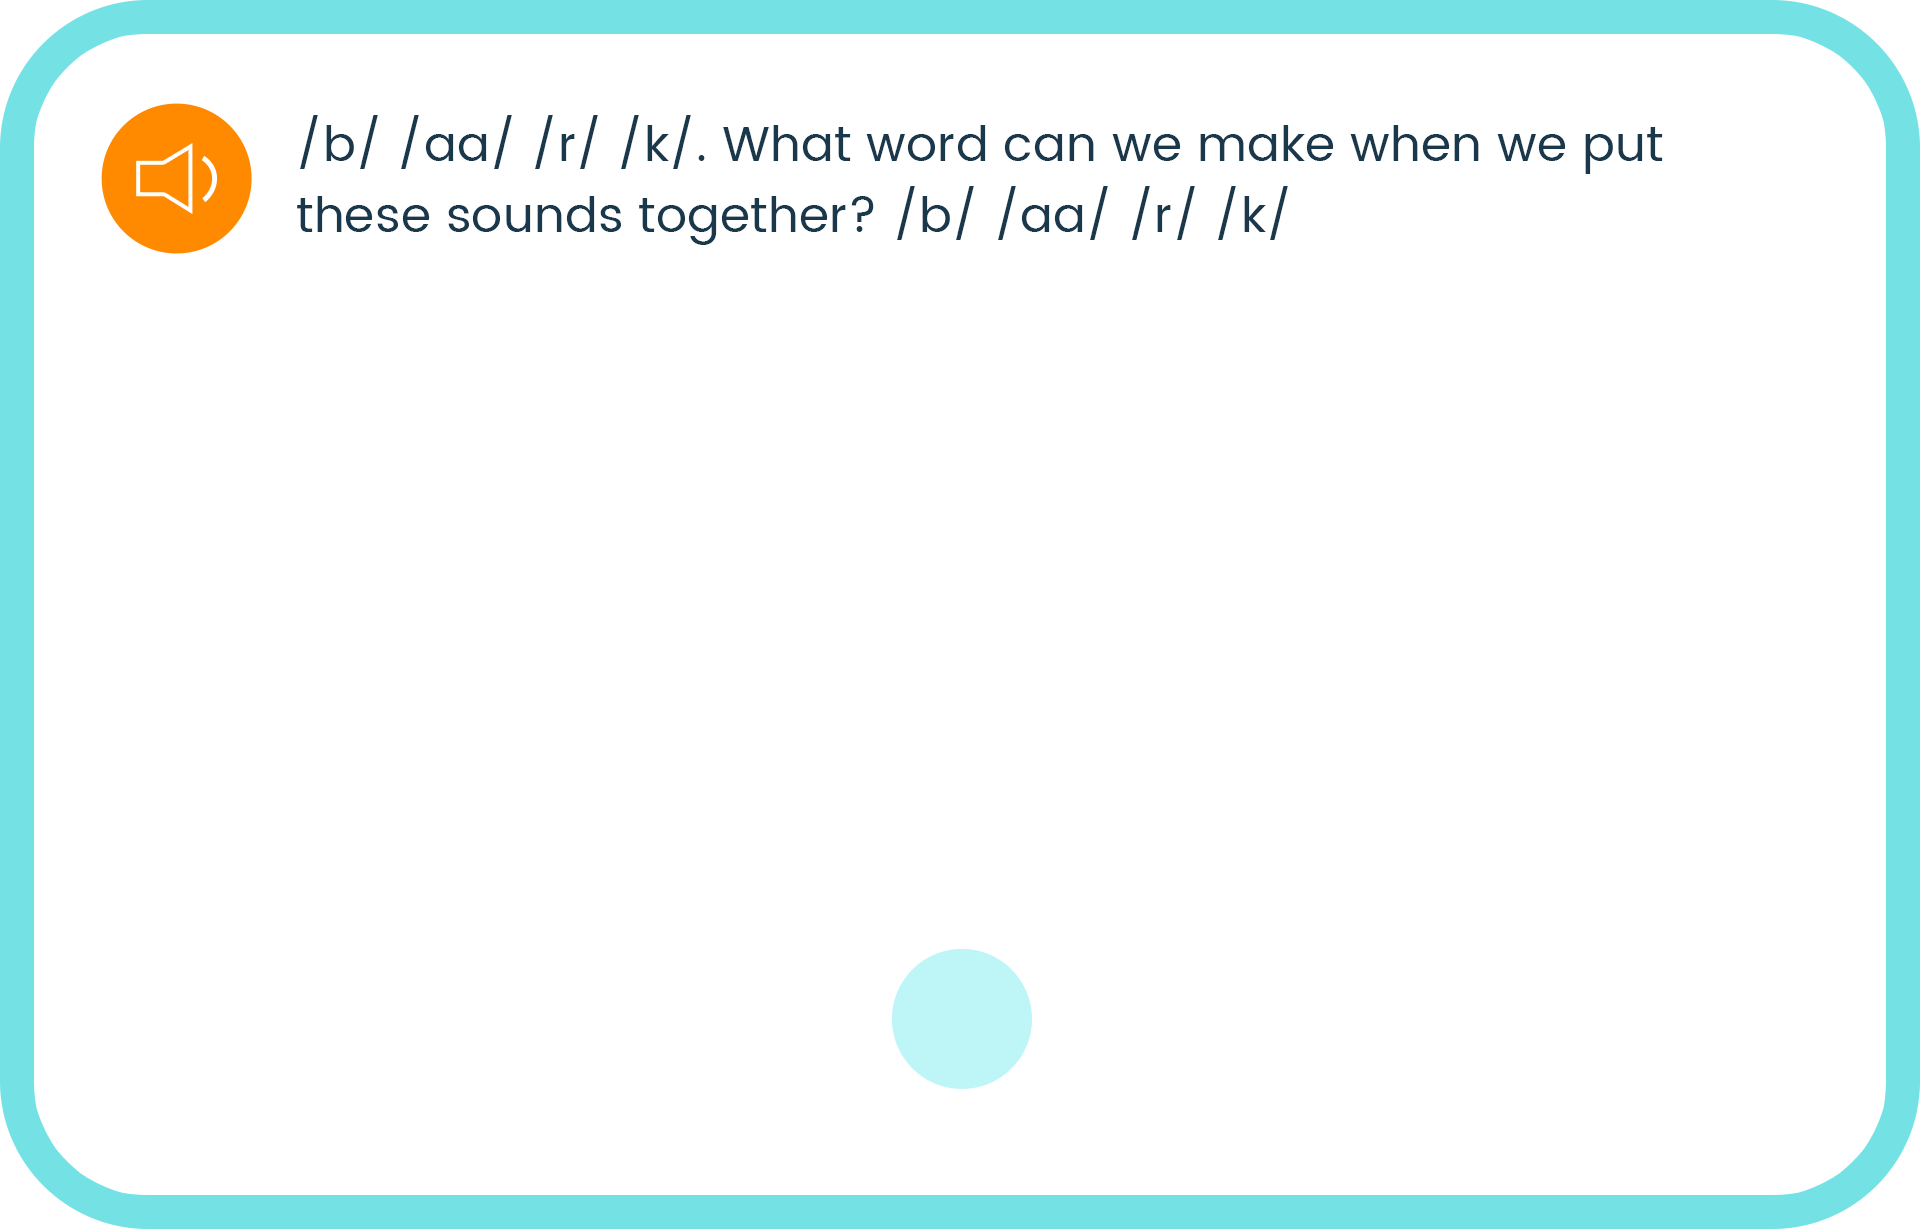 An example of a voice-enabled phoneme blending exercise.